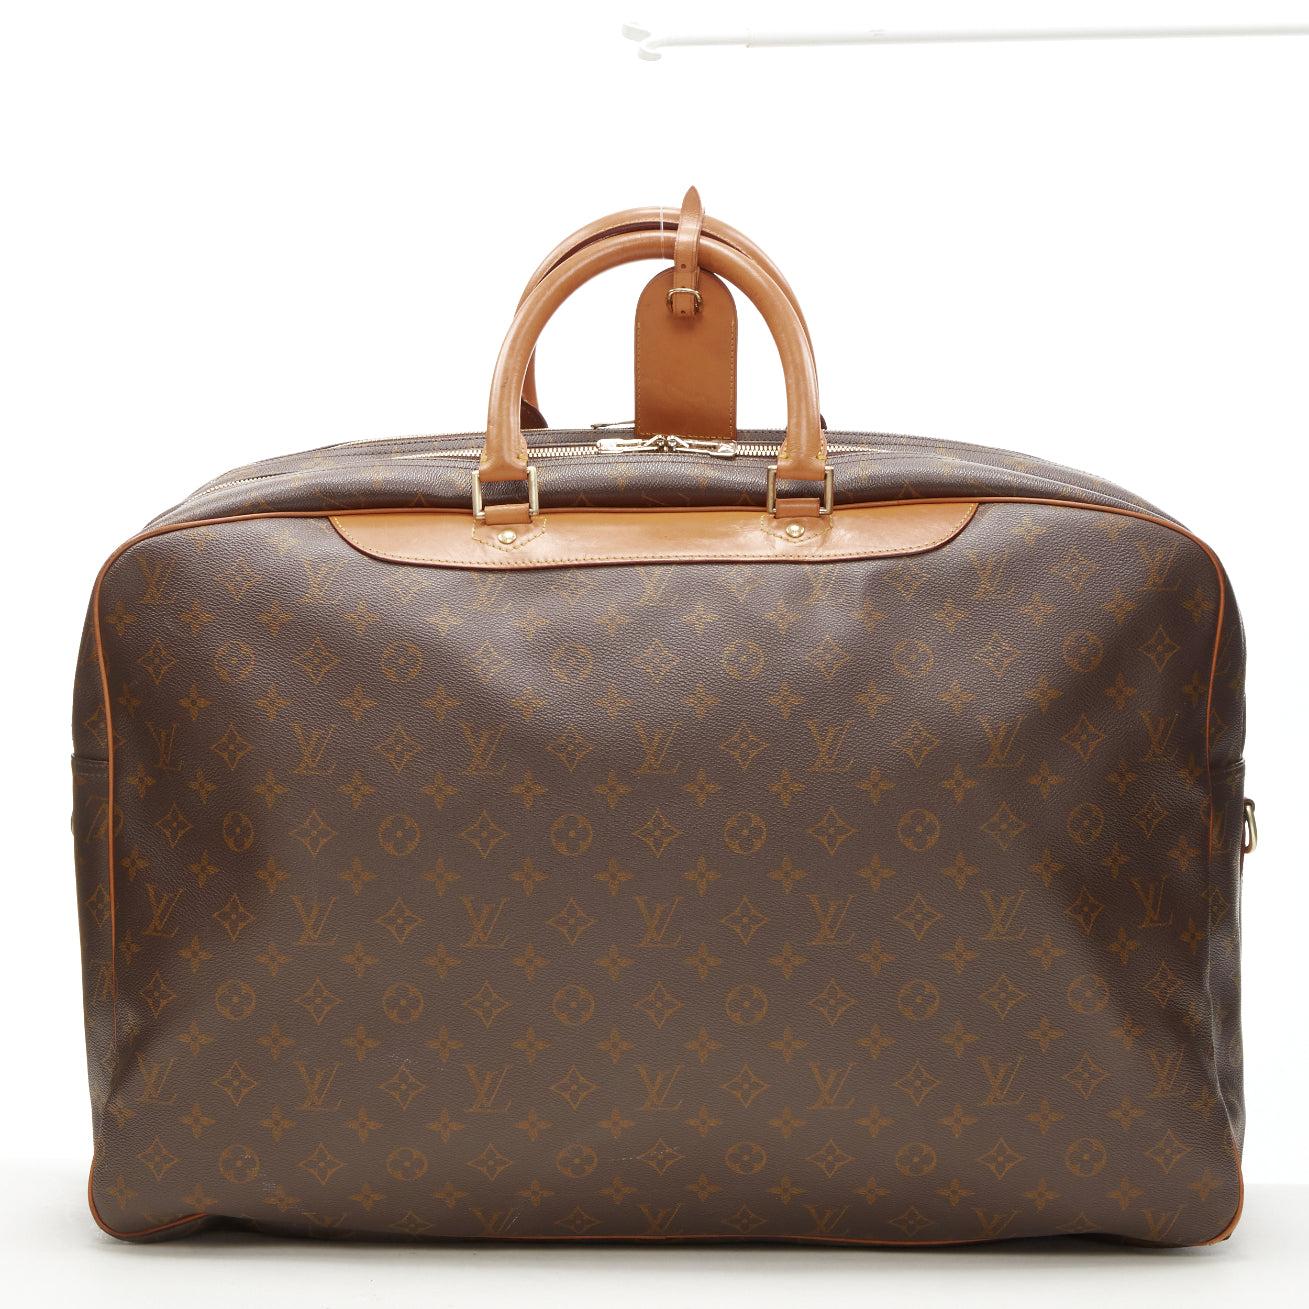 LOUIS VUITTON VIntage Alize brown monogram leather trim 2 compartment bag
Reference: AEMA/A00078
Brand: Louis Vuitton
Model: Alize
Material: Canvas, Leather
Color: Brown
Pattern: Solid
Closure: Zip
Lining: Canvas
Extra Details: Alize 2 compartent